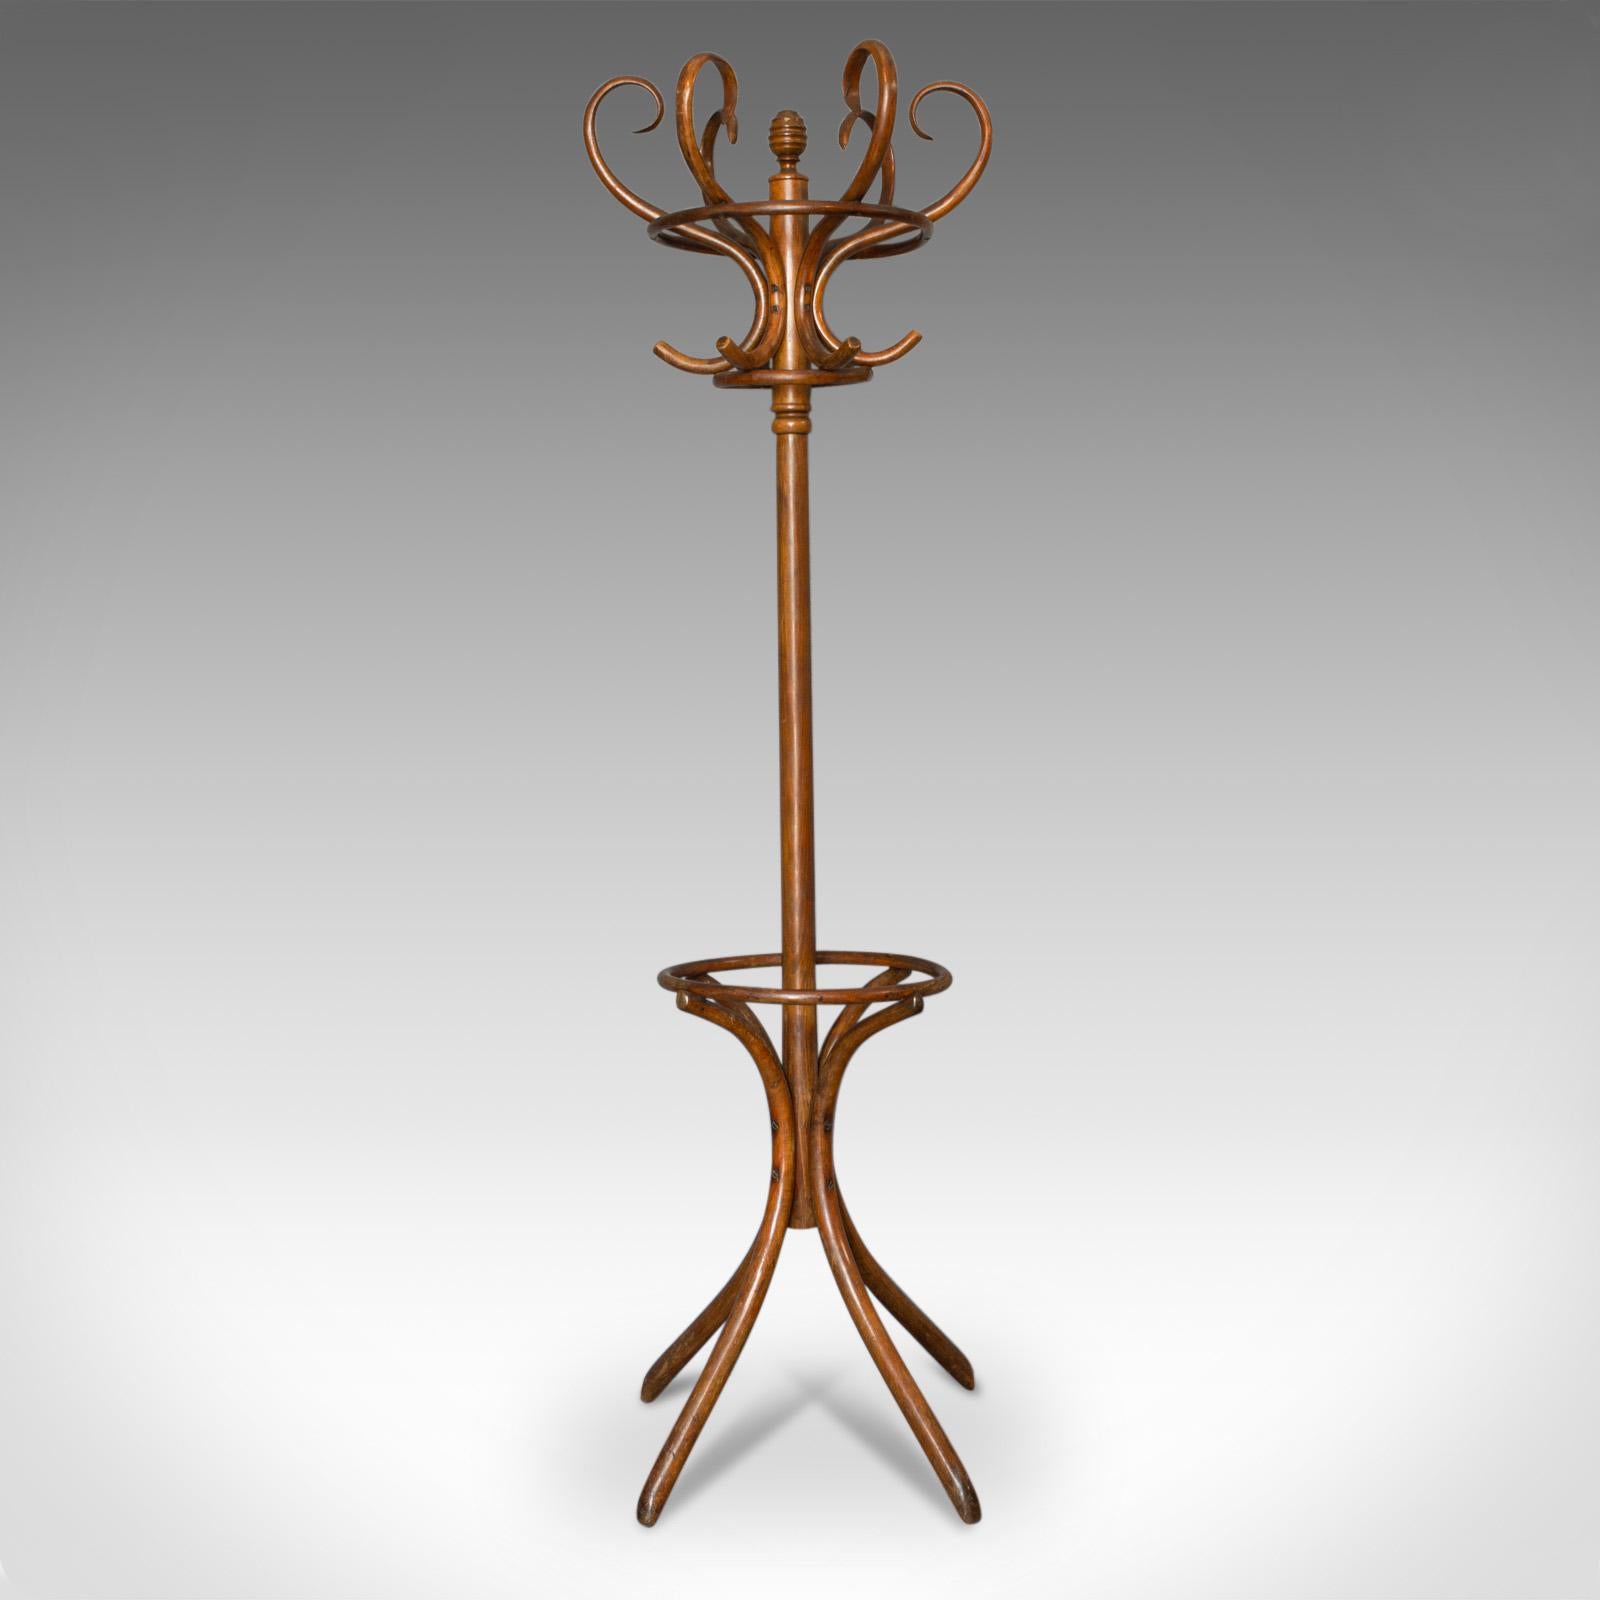 This is an antique bentwood coat rack or hall stand in the Thonet café taste. An English, beech hall hat, coat, stick and umbrella stand dating to the early 20th century, circa 1910.

Displays good colour throughout and a desirable aged